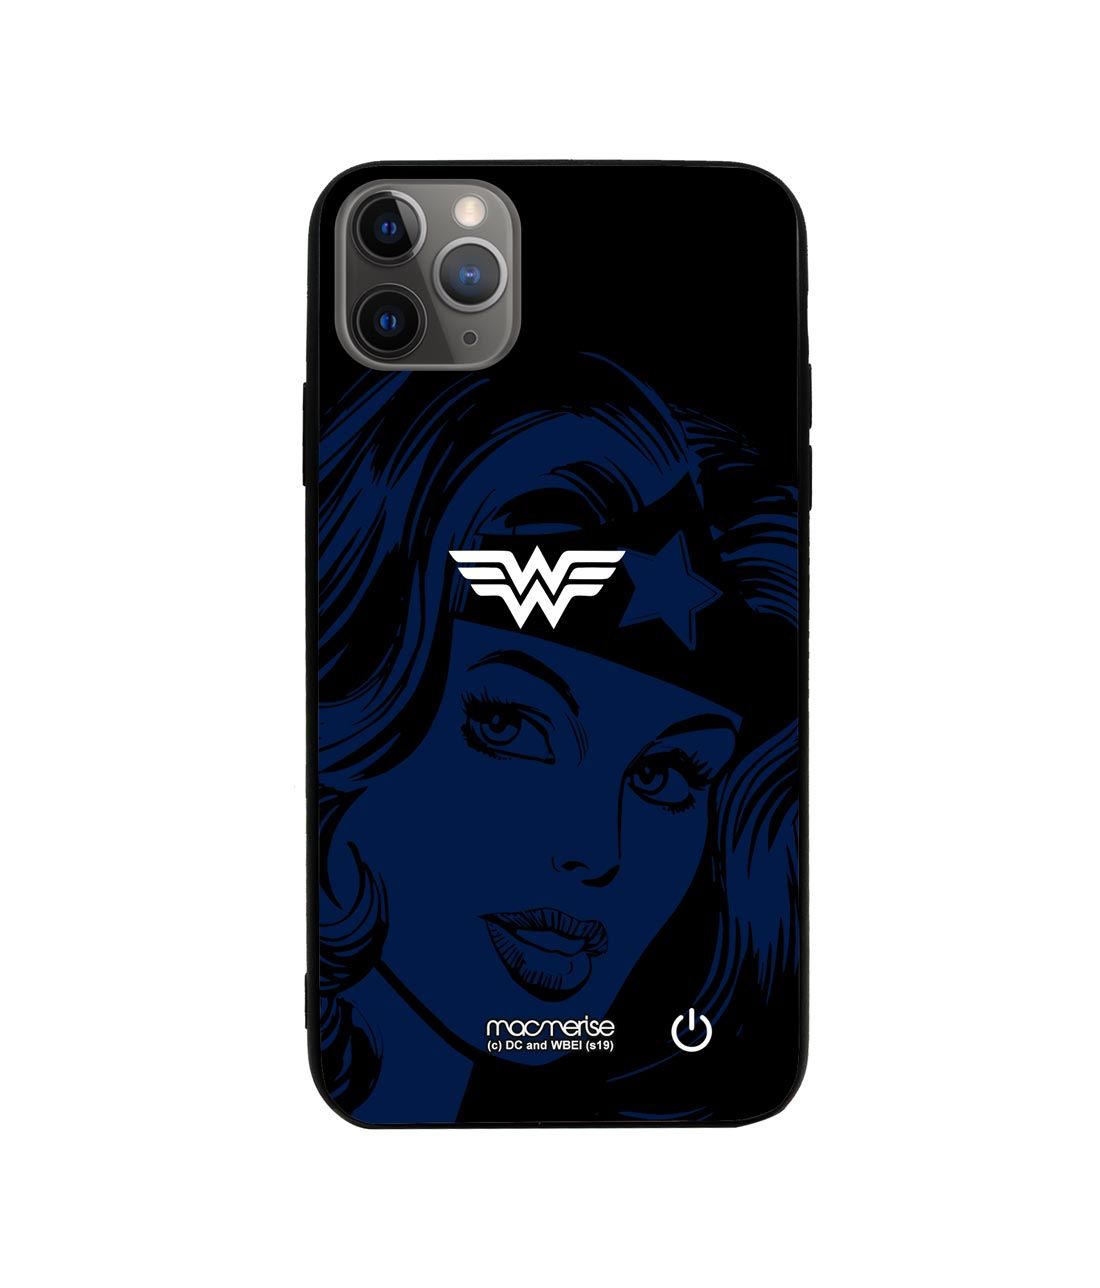 Silhouette Wonder Woman - Lumous LED Phone Case for iPhone 11 Pro Max